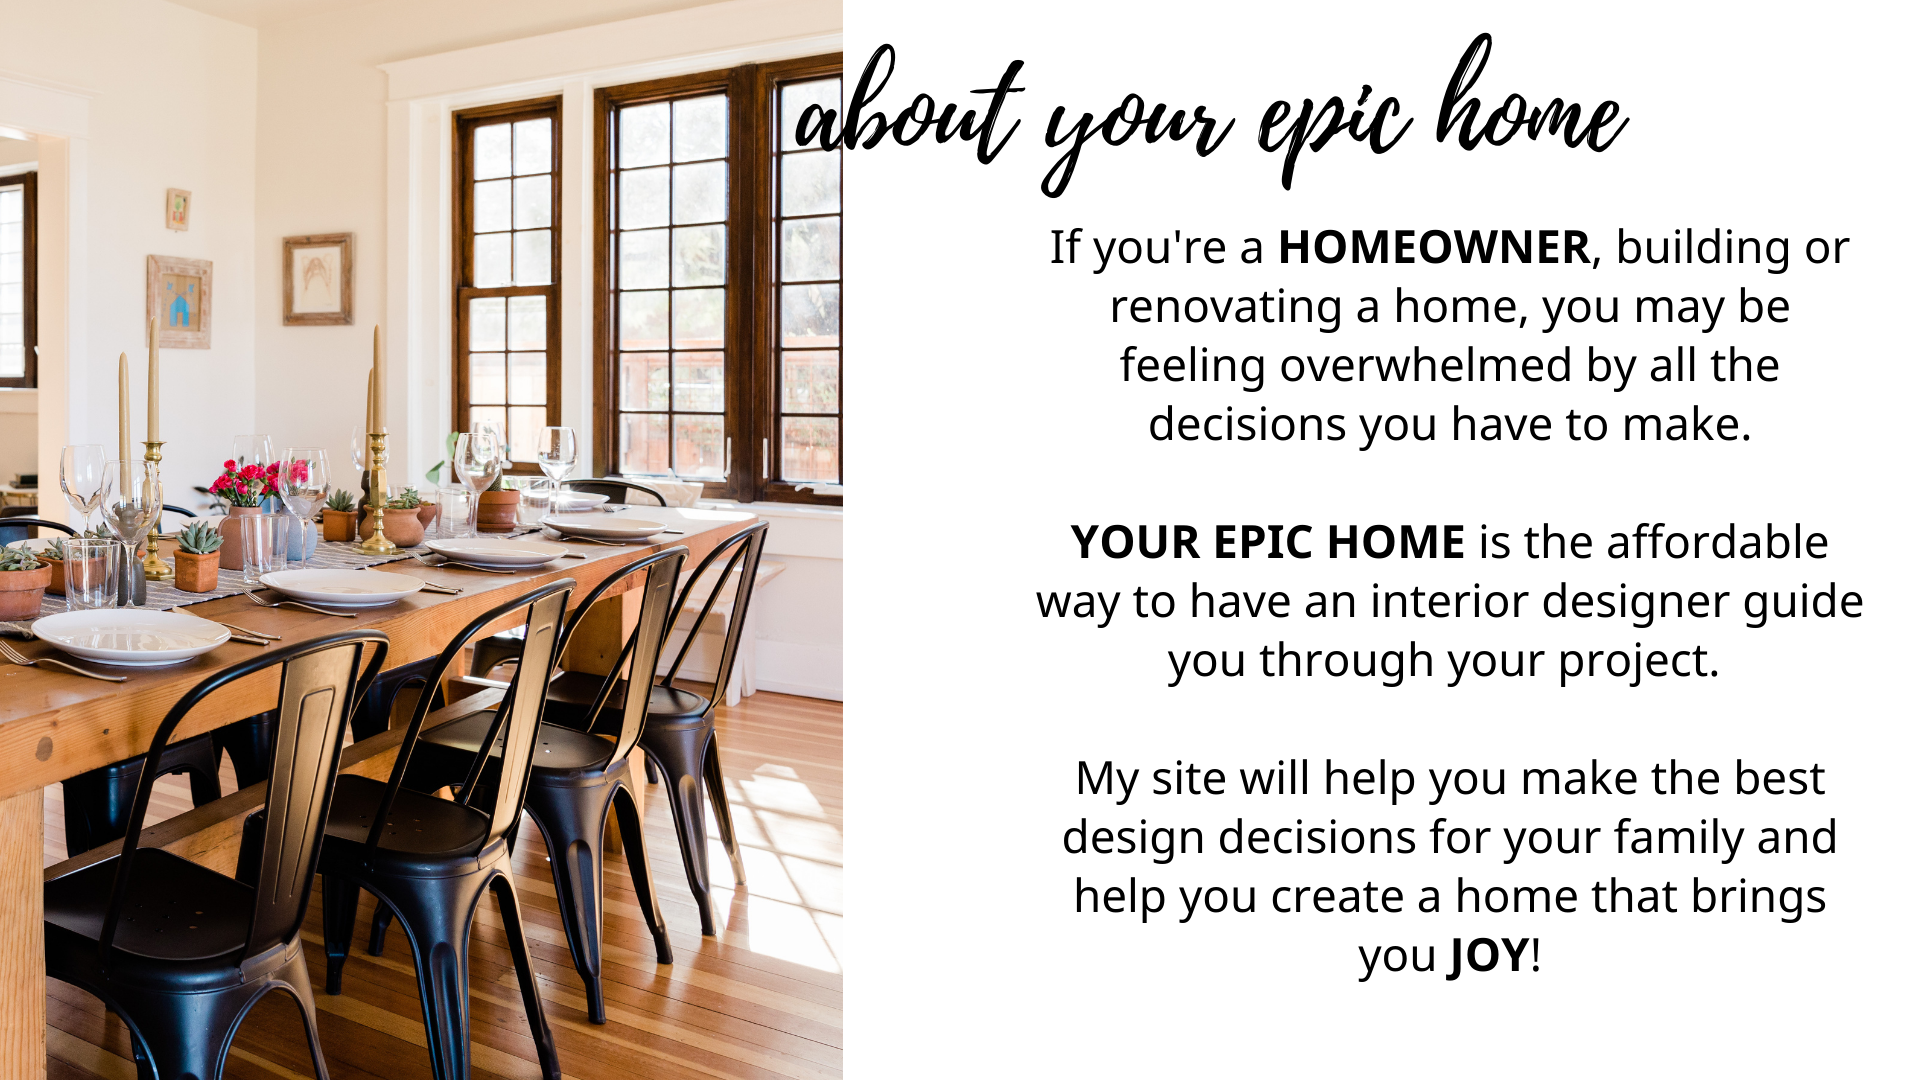 If you are a HOMEOWNER, building or renovating a home, you may be feeling overwhelmed by all the decisions you have to make.    YOUR EPIC HOME is the affordable way to have an interior designer guide you through your project.  My site will help you make the best design decisions for your family and help you create a home that brings you joy!